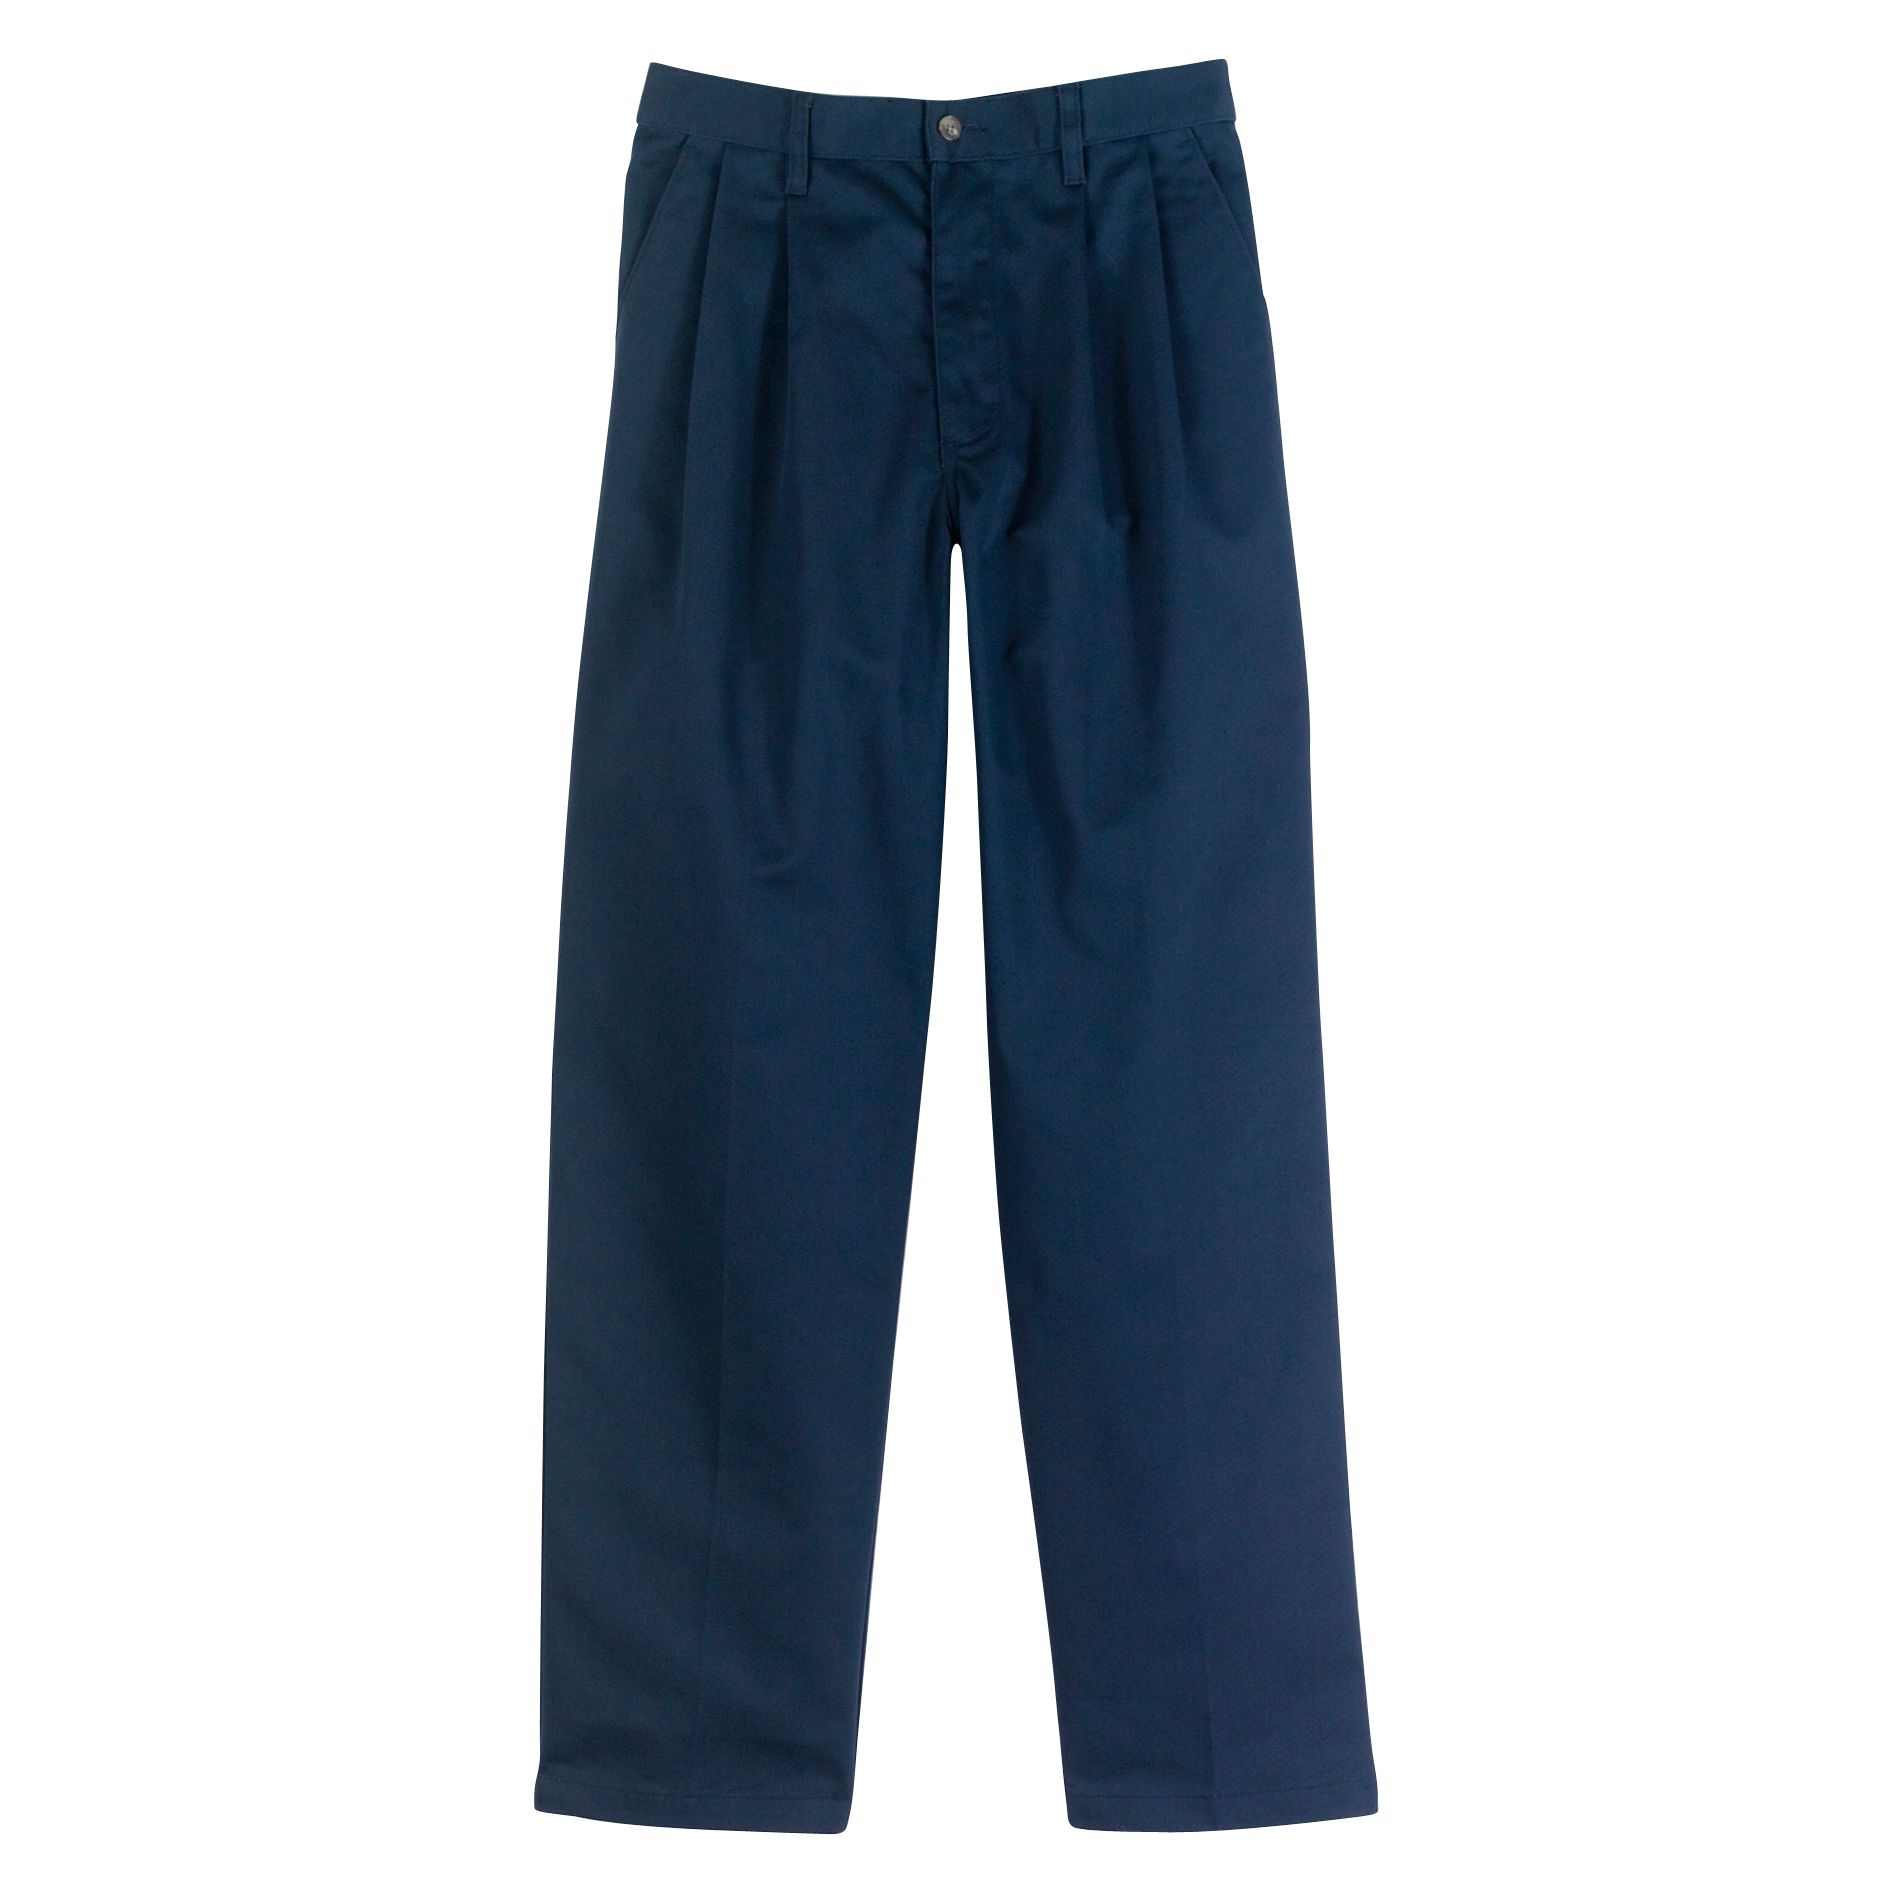 Men's Pleated Twill Pant